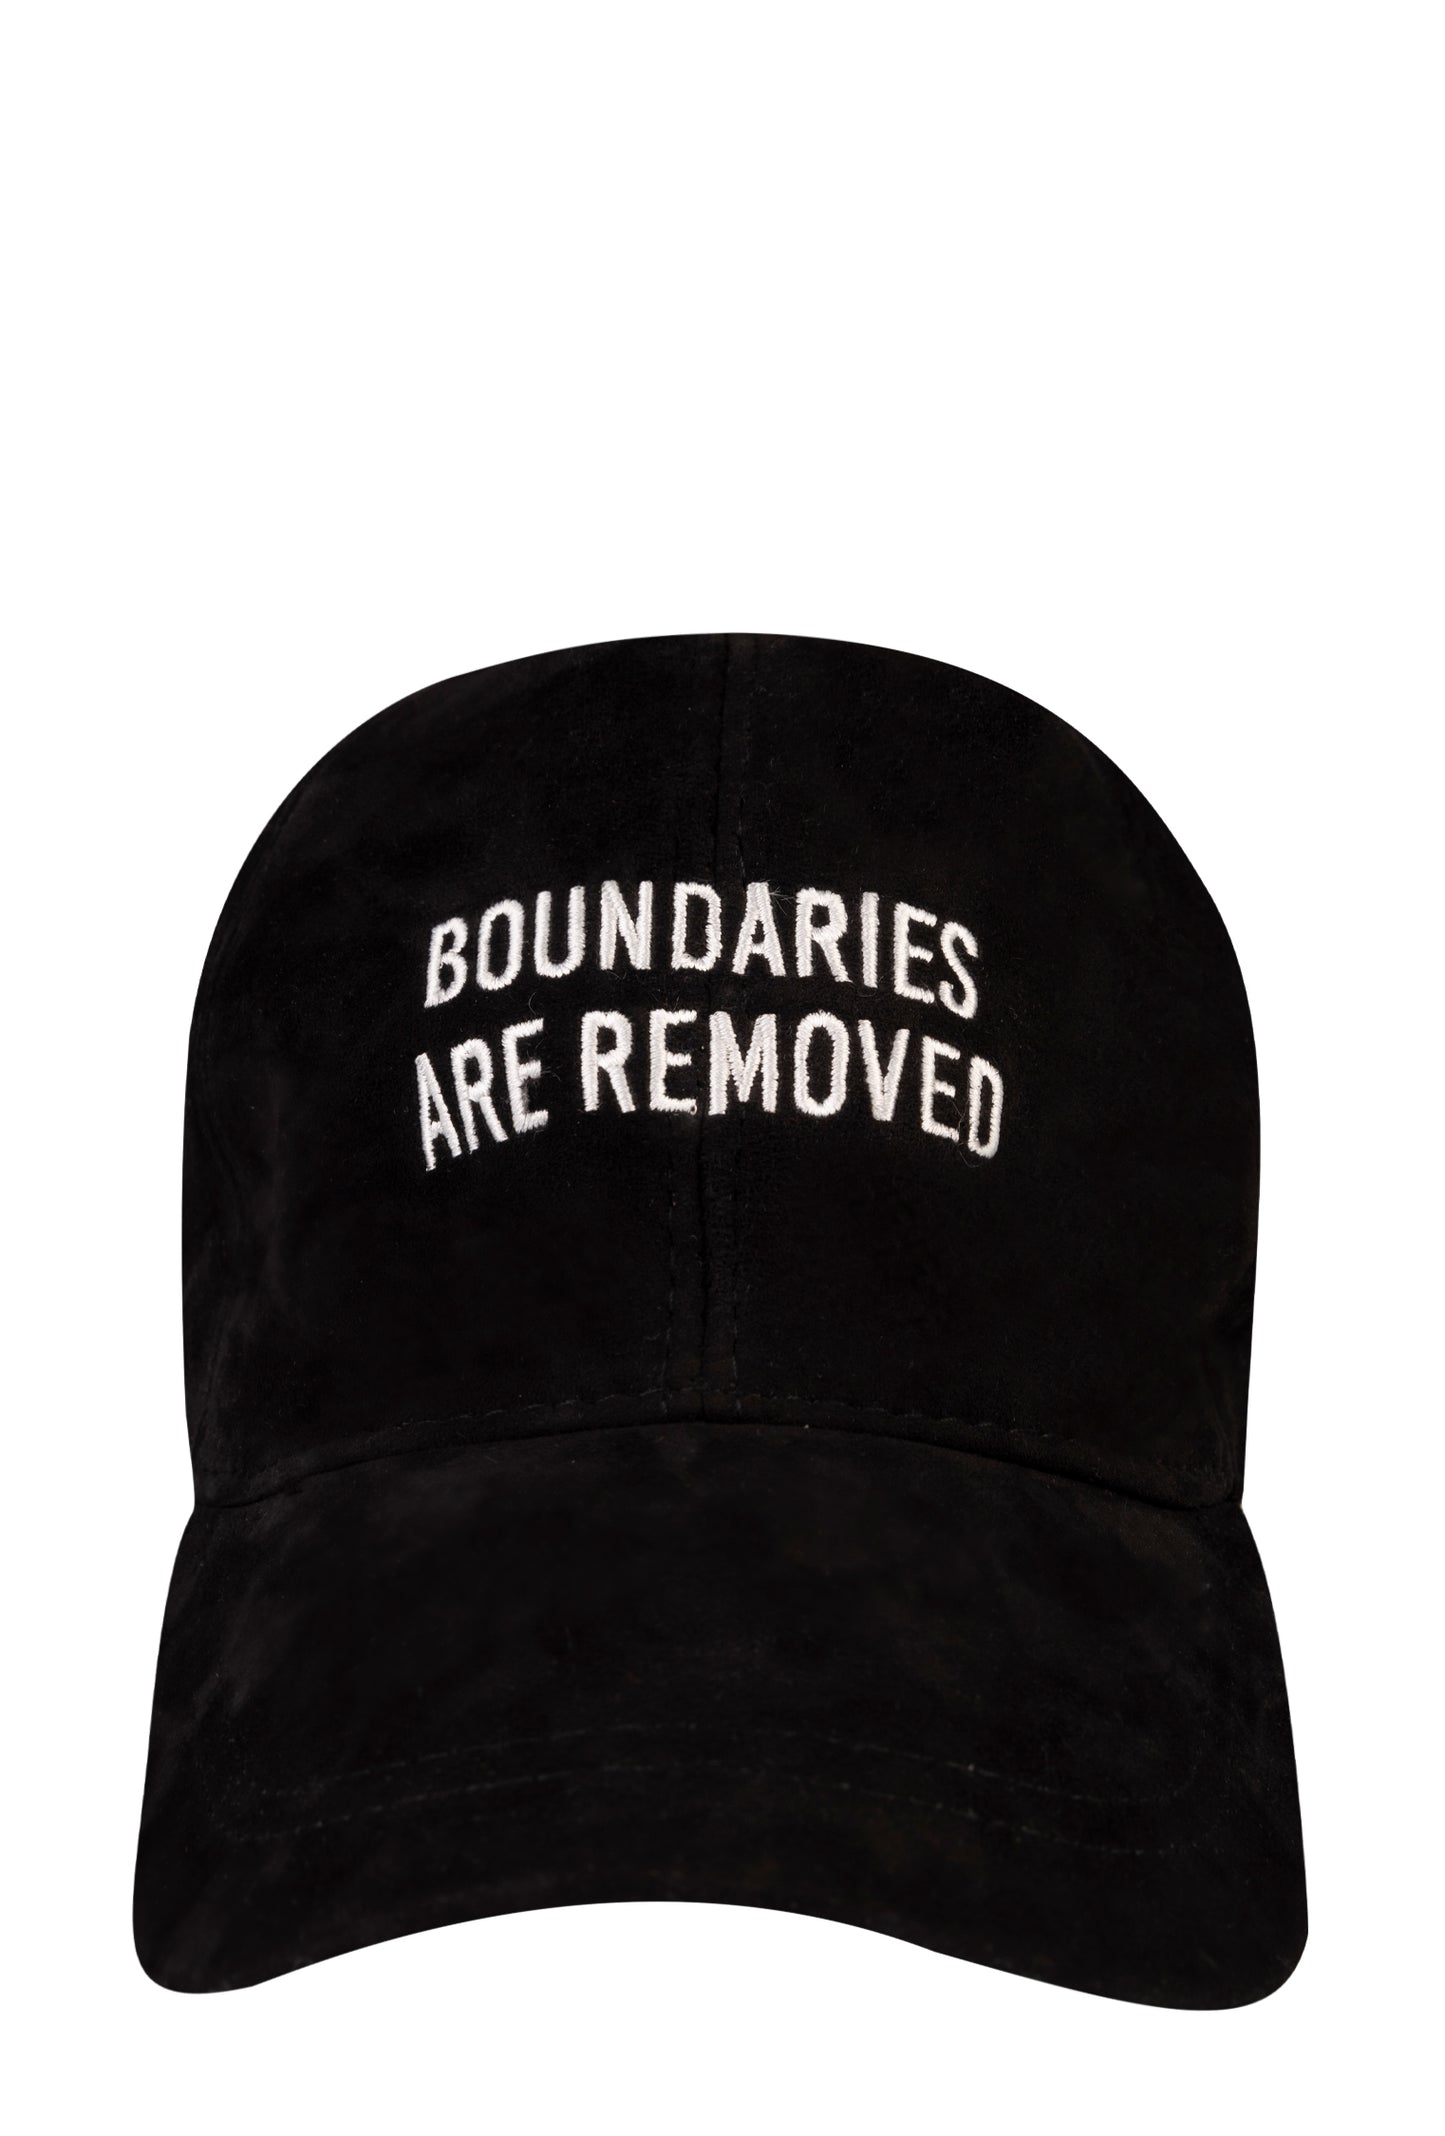 Boundaries Are Removed - Black